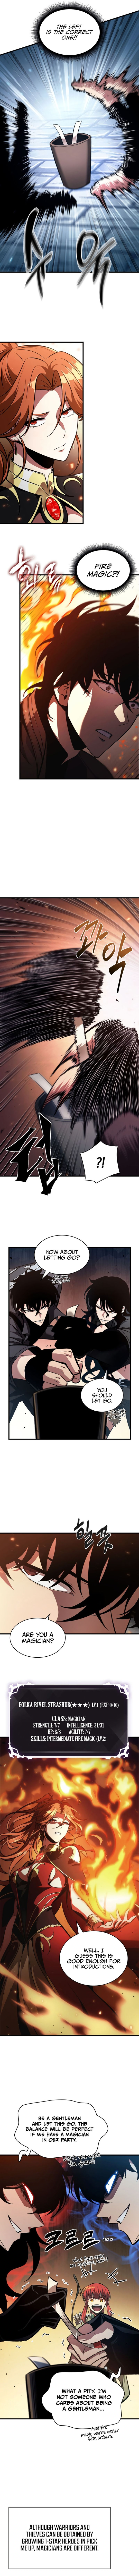 Pick Me Up Chapter 20 page 6